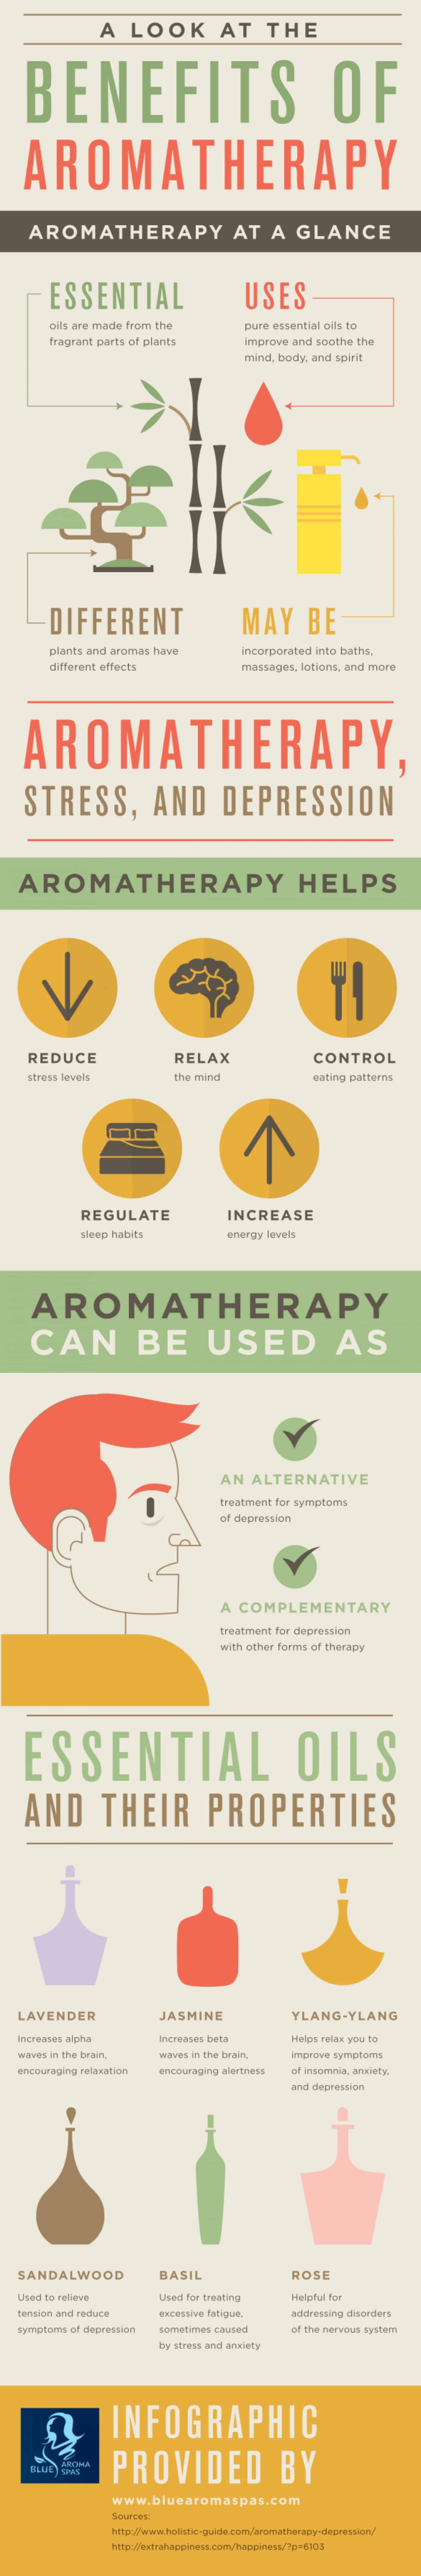 a-look-at-the-benefits-of-aromatherapy_54038df2c01b9_w1500